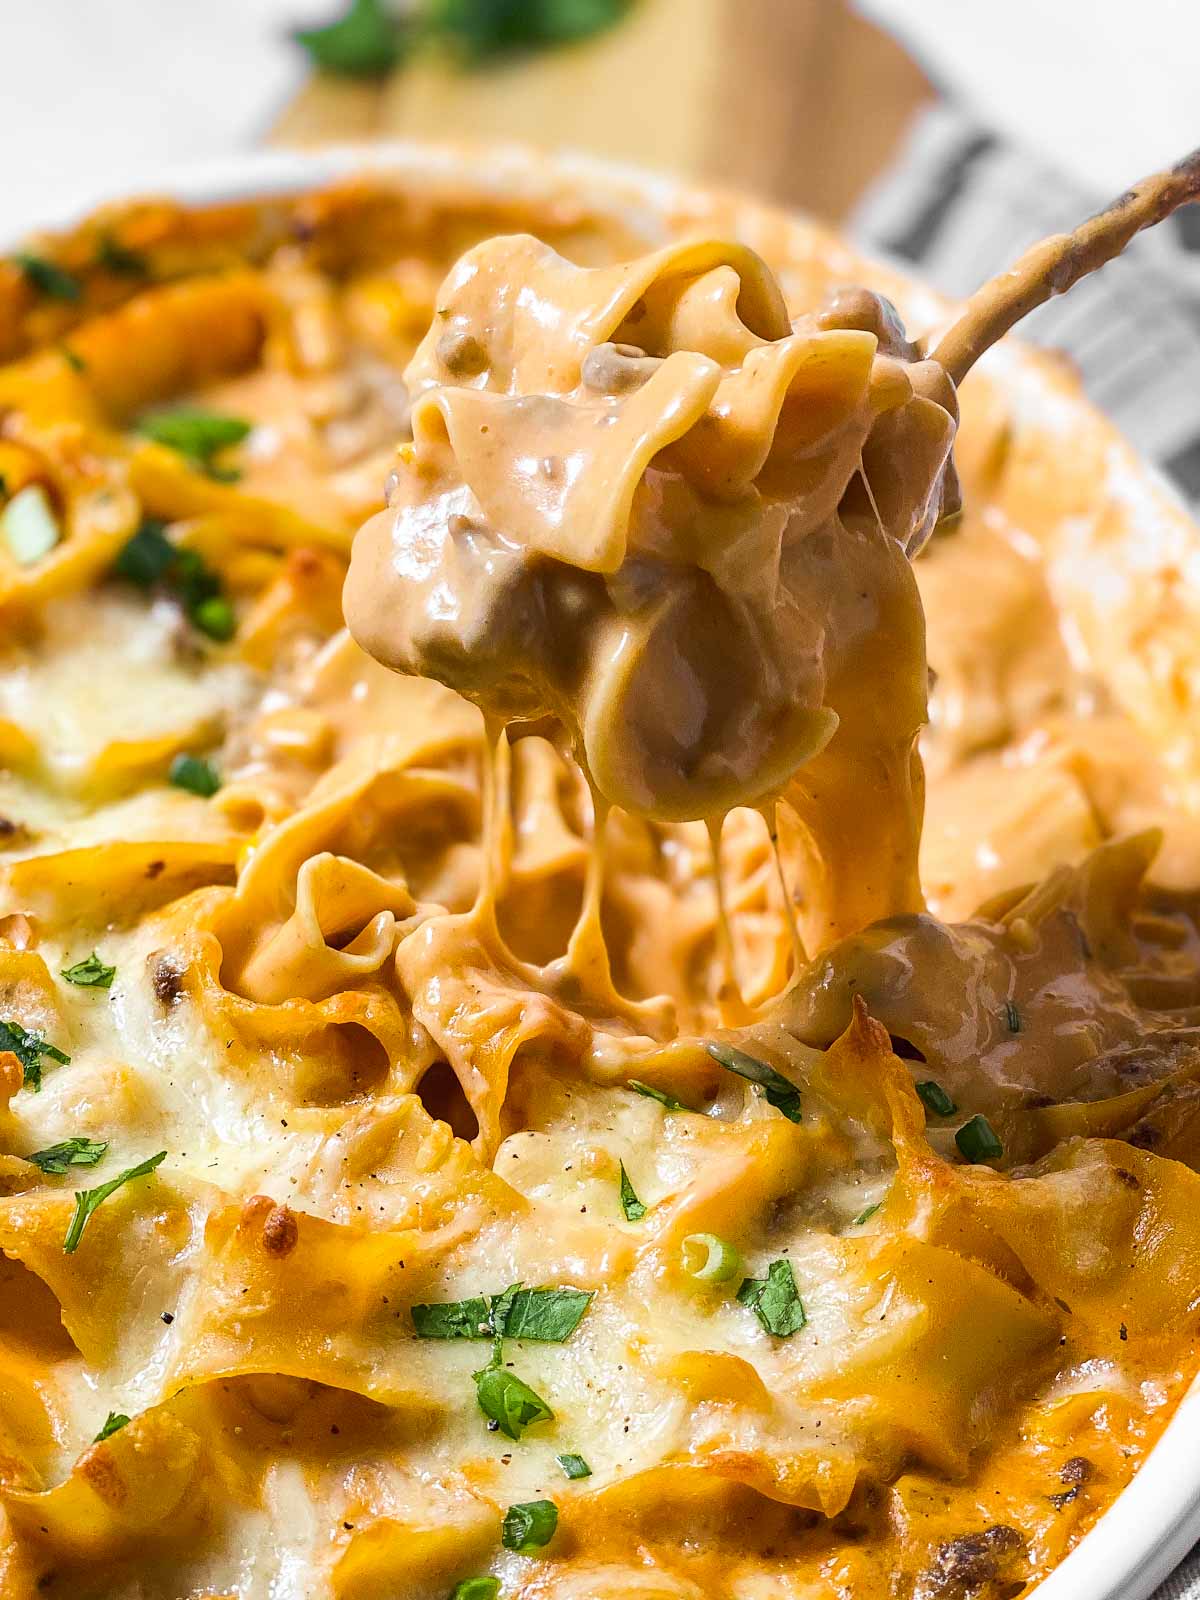 spoon scooping hamburger noodle casserole from white casserole dish